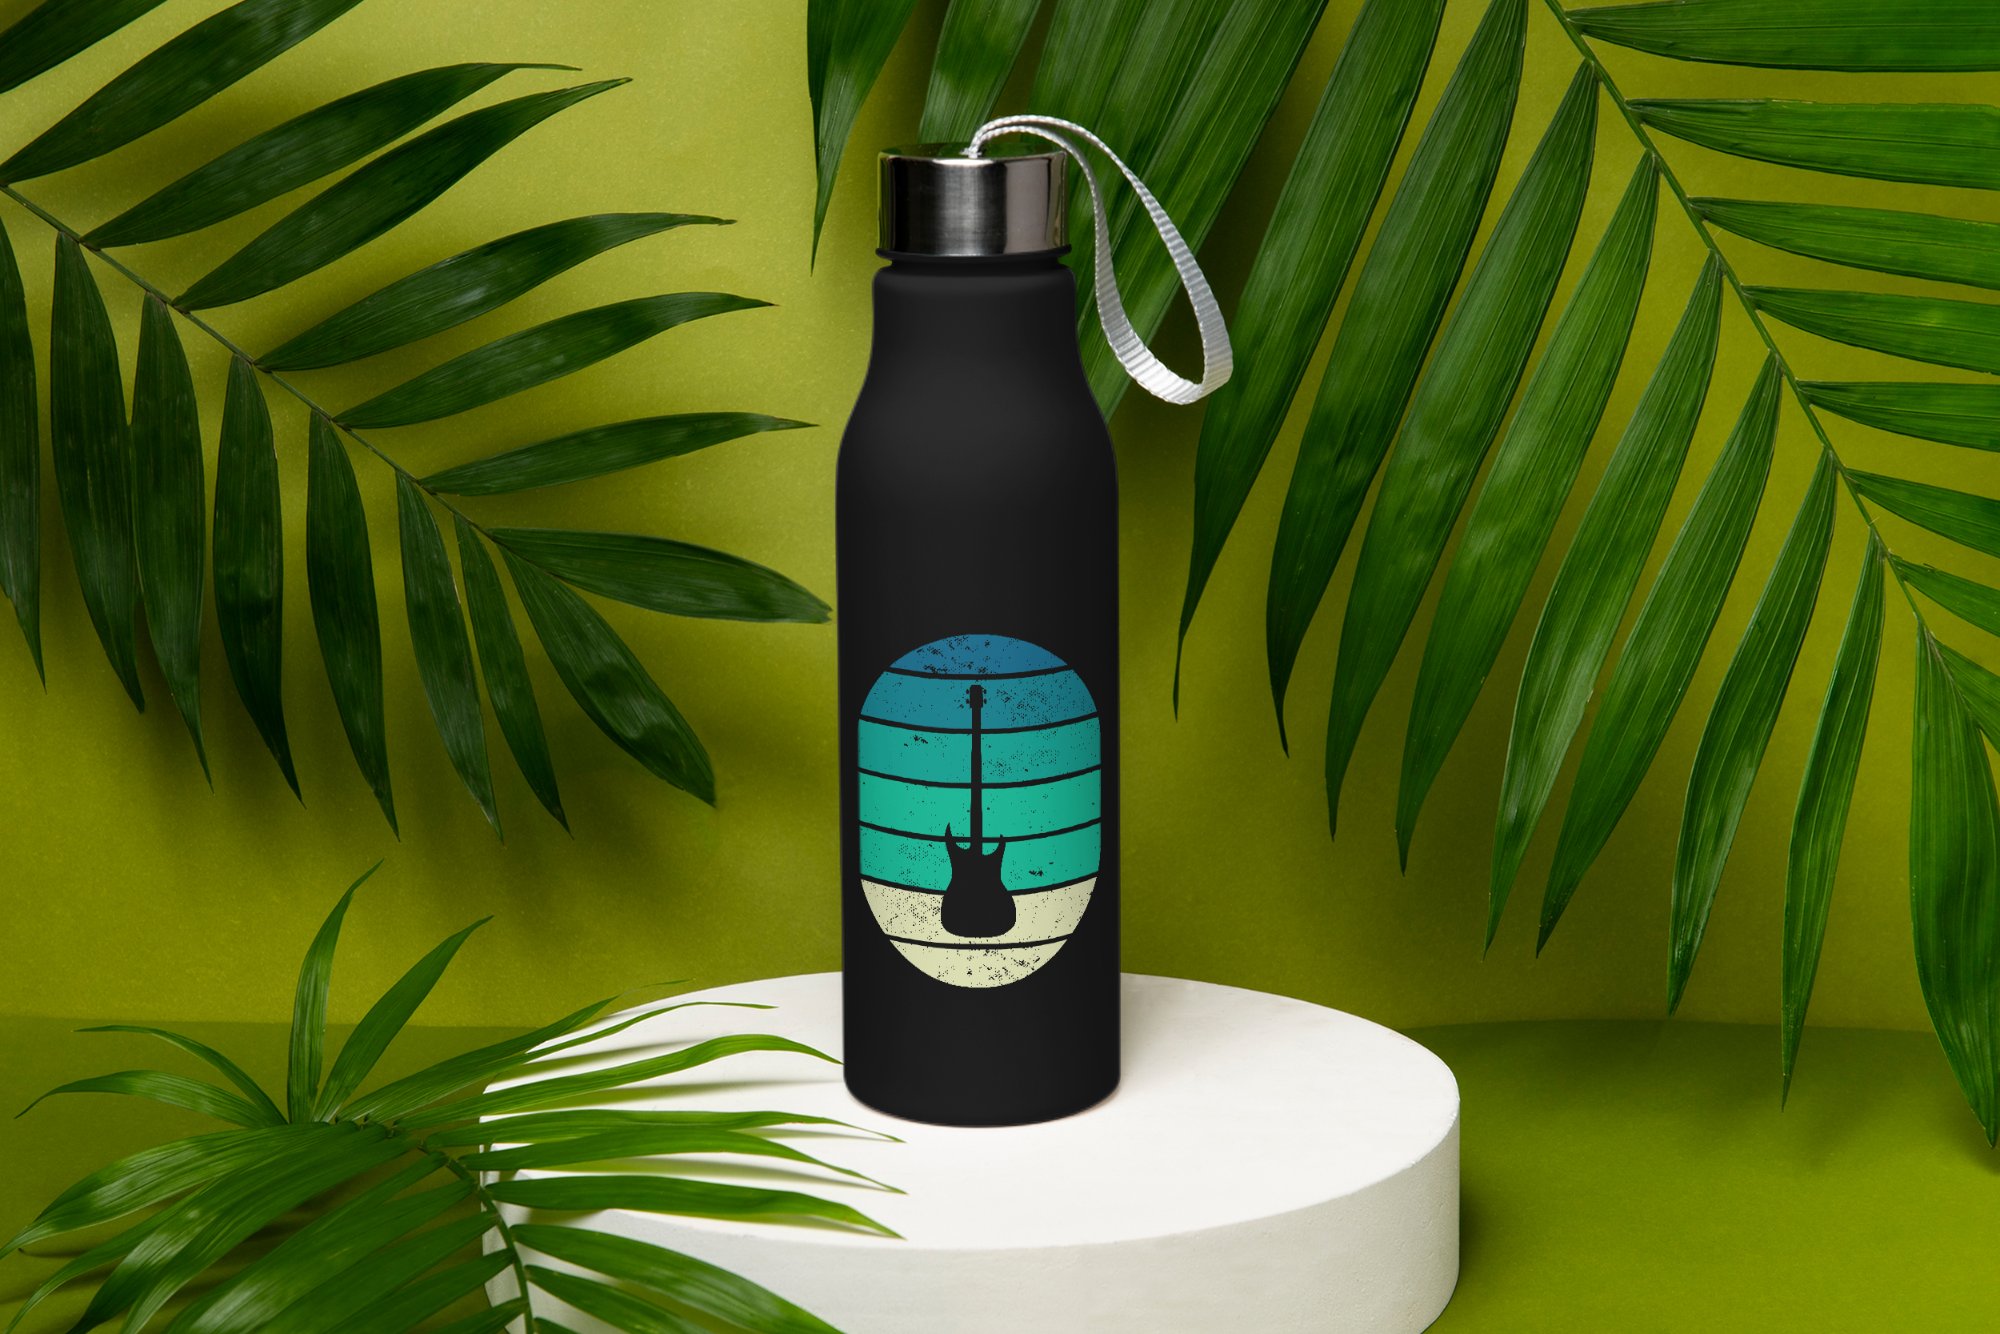 water bottle and palm leaves mockup 2000x1334 431